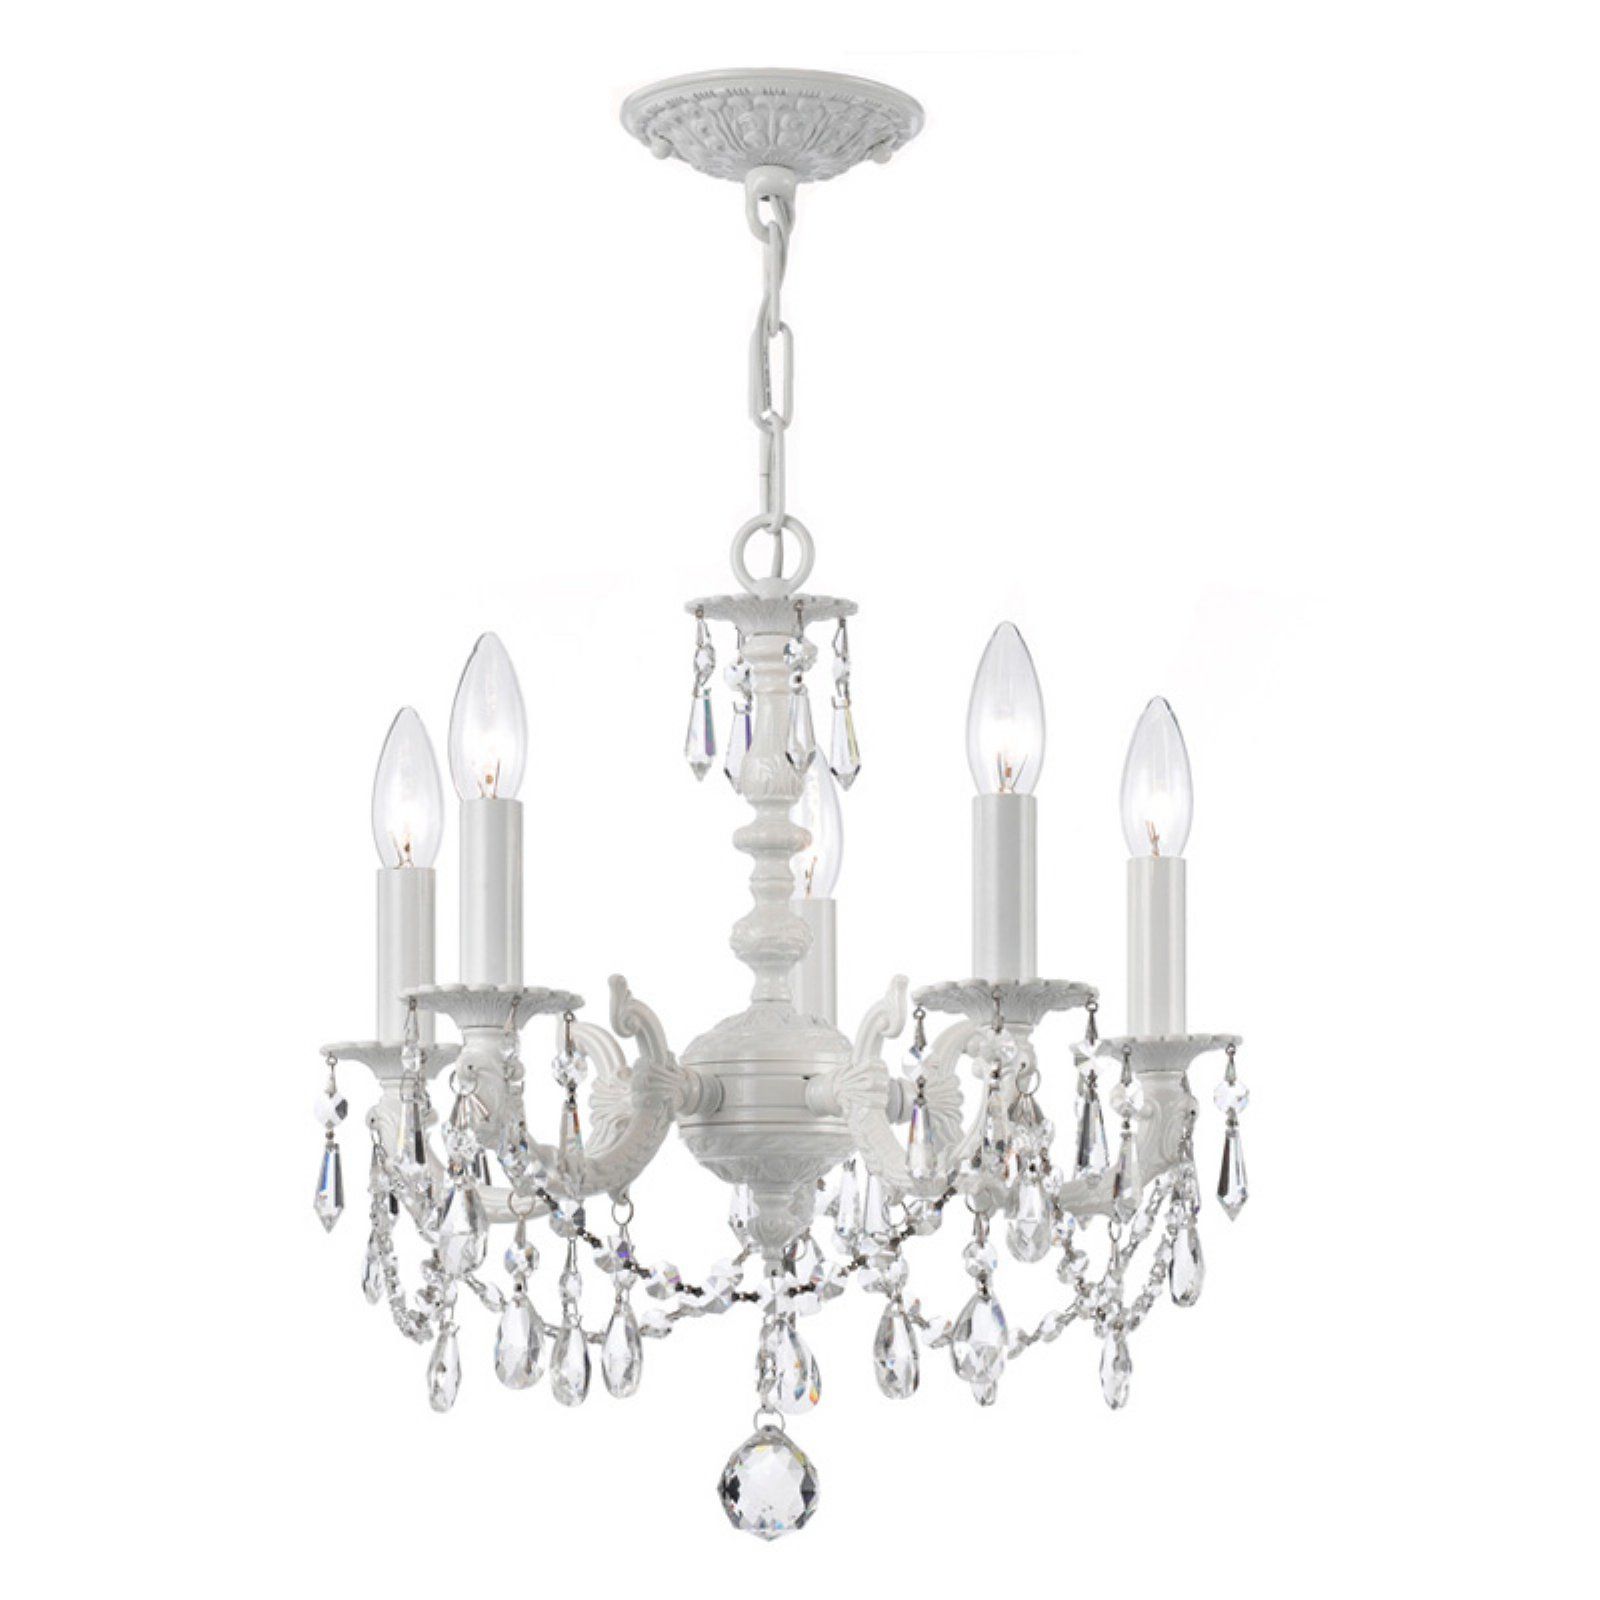 Crystorama Paris Market 5515 Ww Cl Mwp 5 Light Chandelier Within Blanchette 5 Light Candle Style Chandeliers (View 9 of 30)